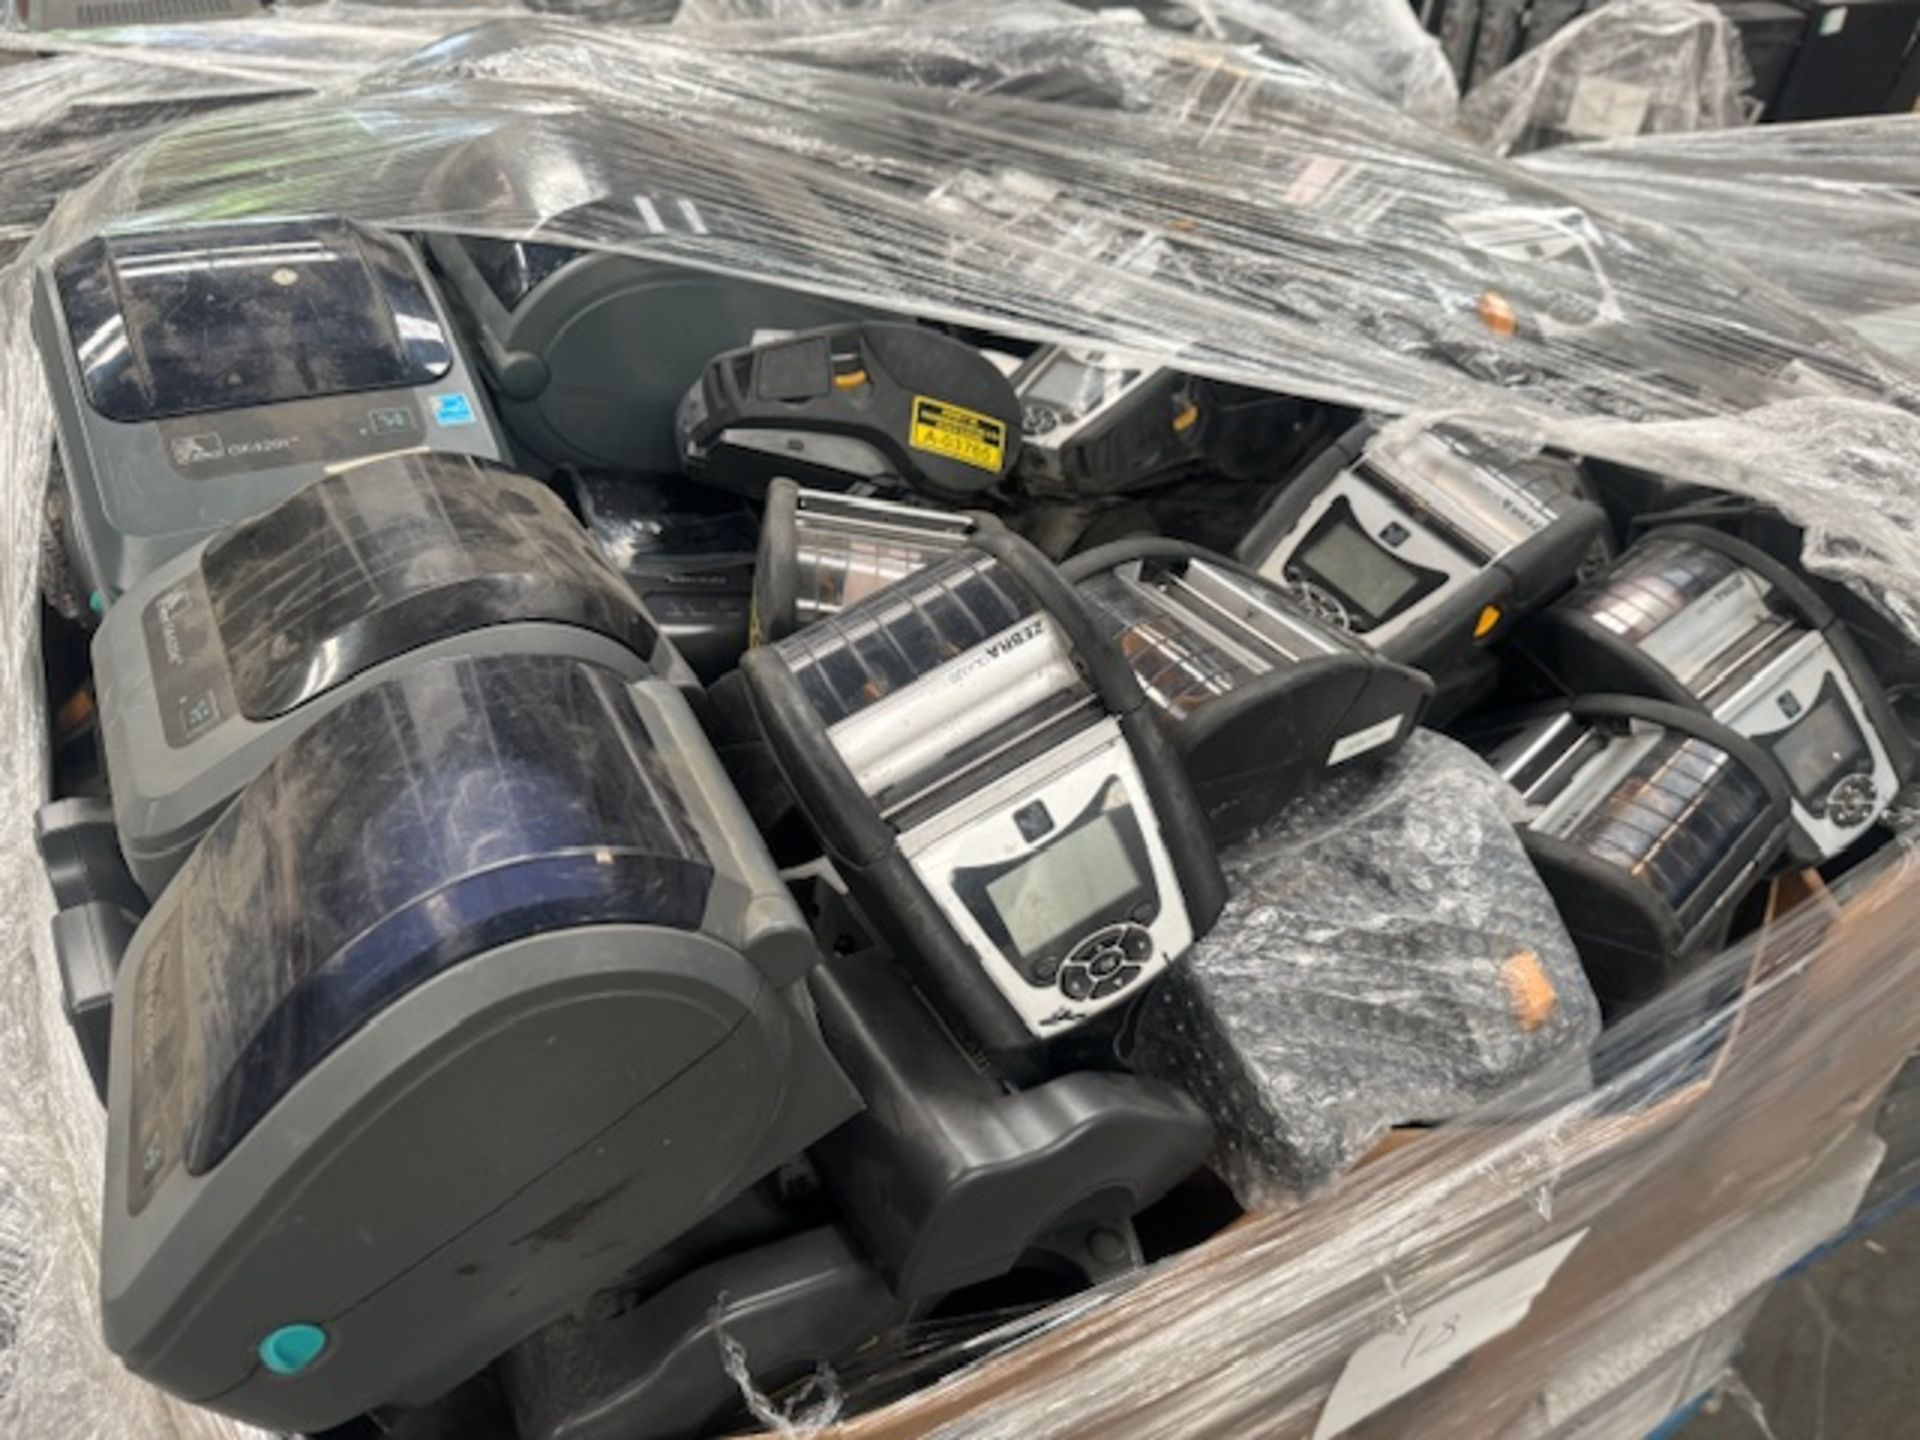 IT PALLET LOT INCLUDING A VERY LARGE QUANTITY OF ZEBRA LABEL PRINTERS IN VARIOUS MODELS AND SIZES - Image 2 of 2